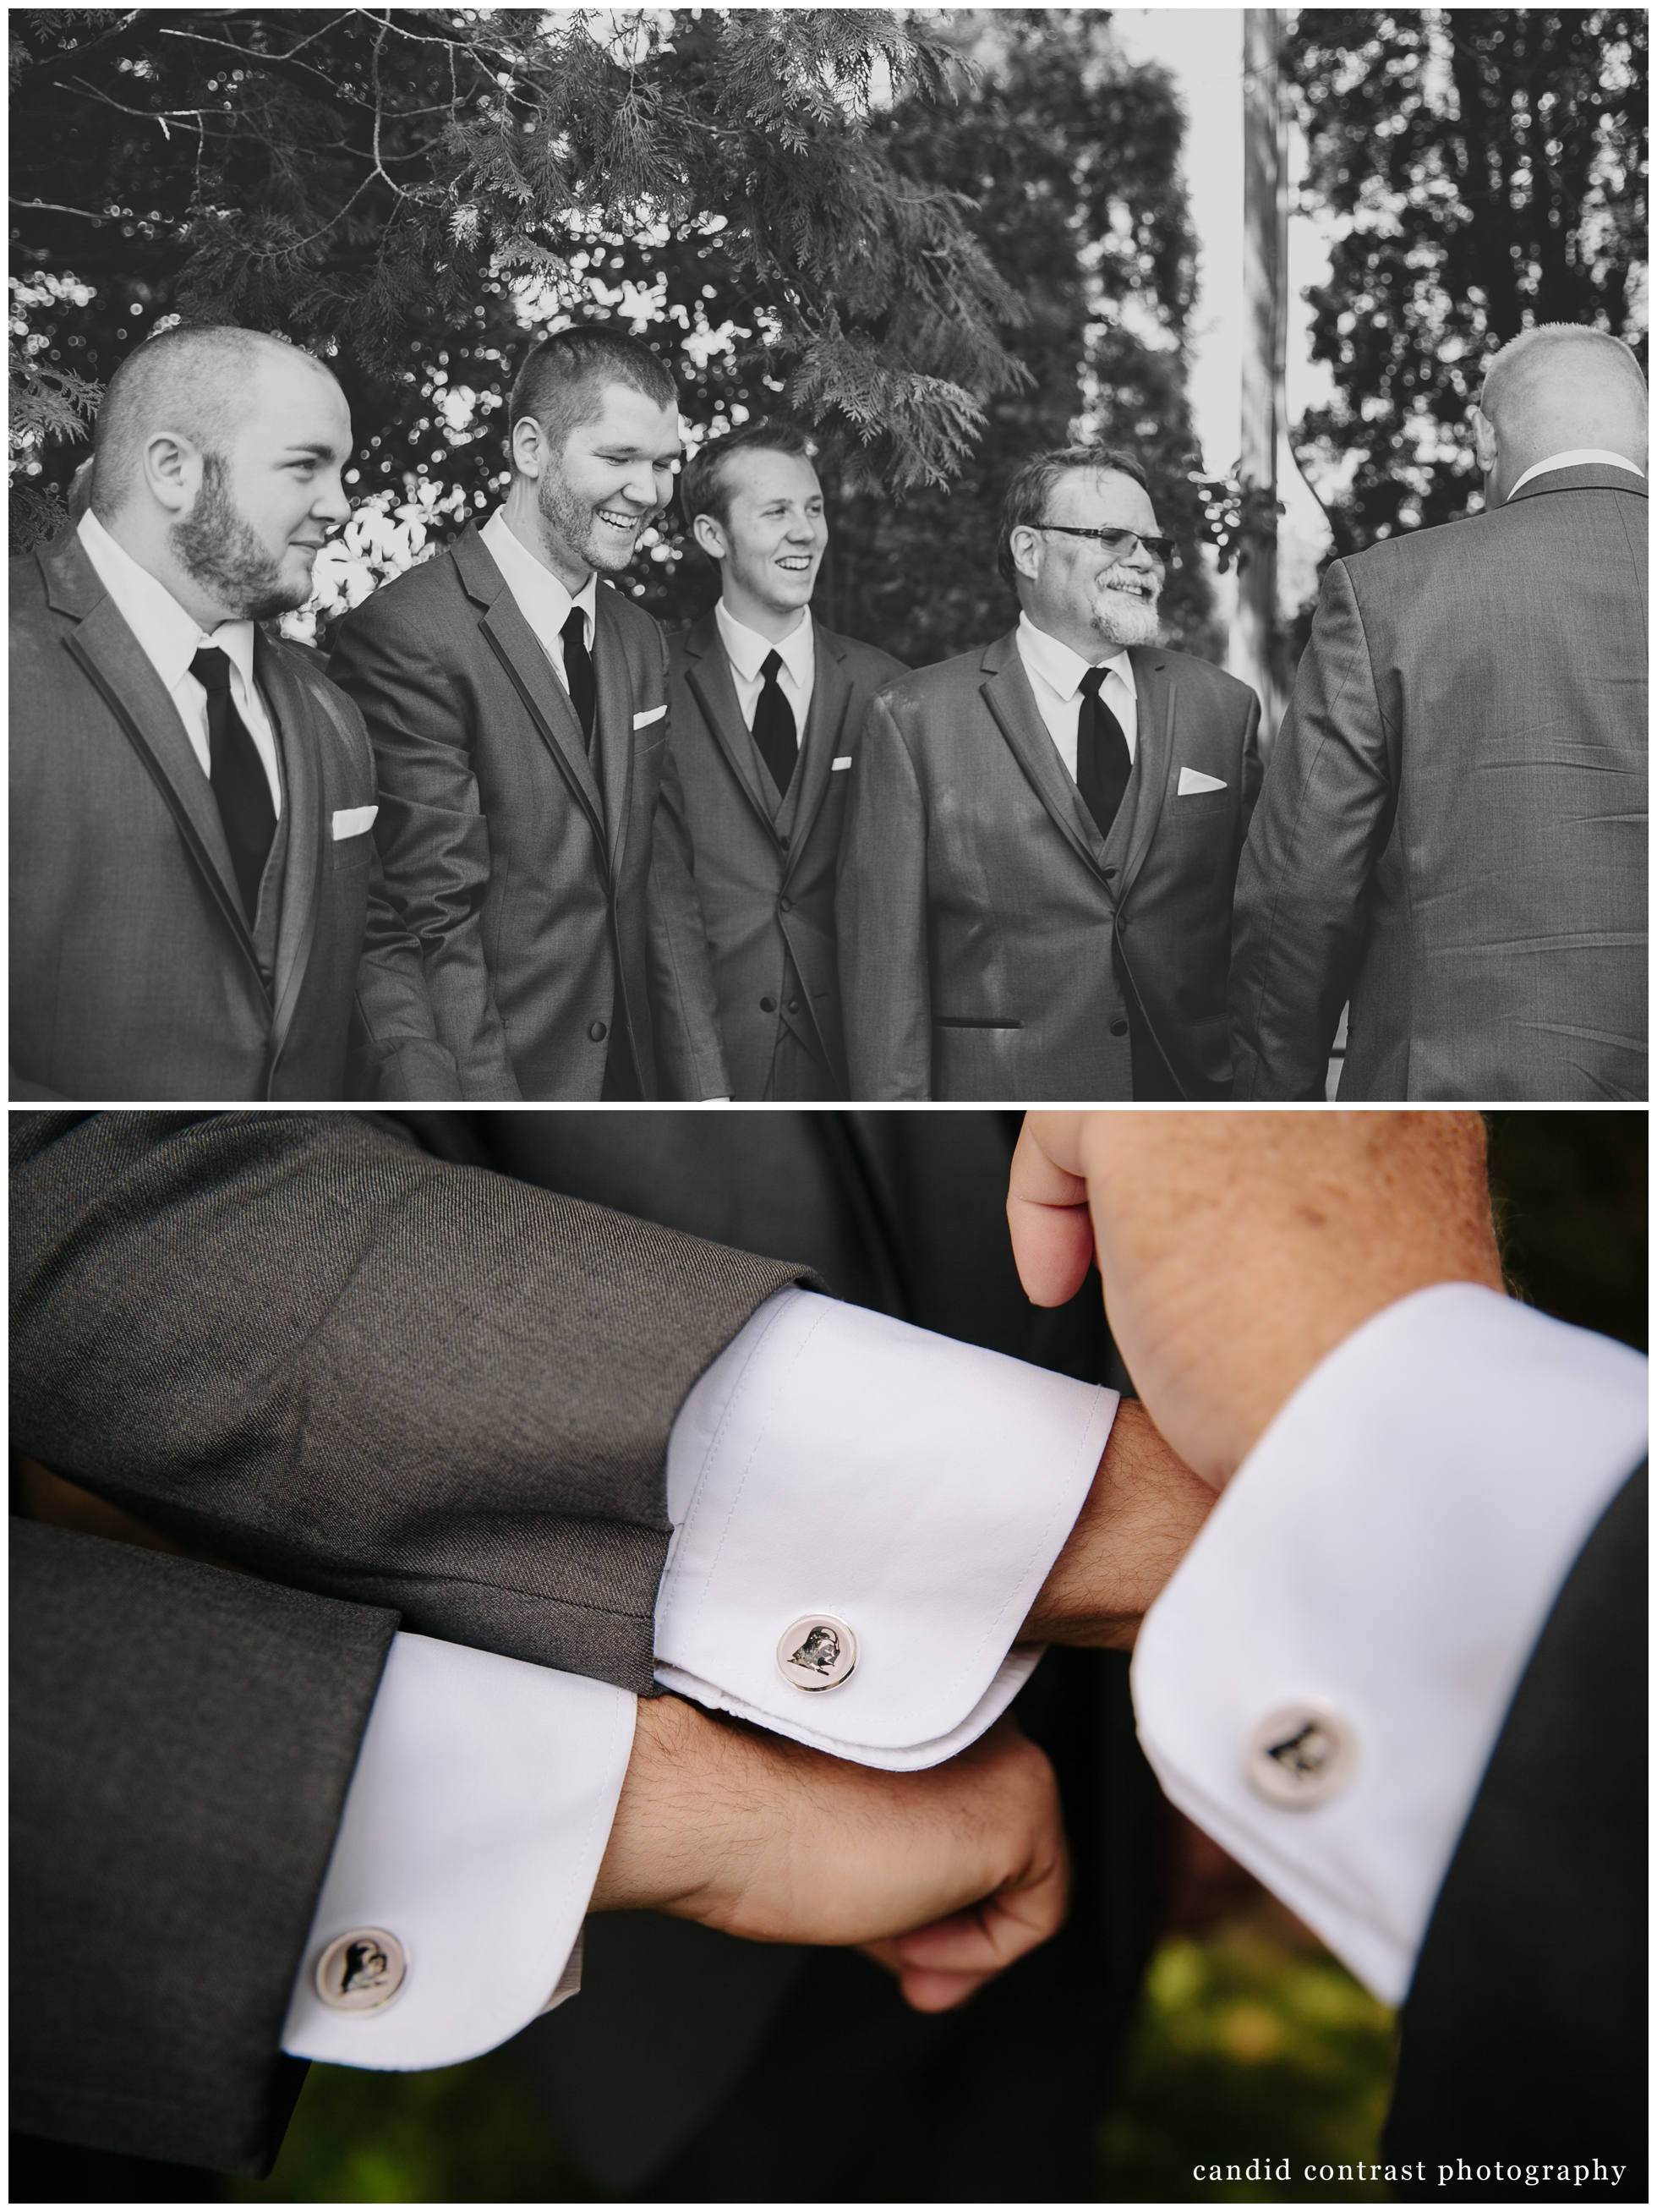 star wars cuff links, groom getting ready at dubuque arboretum at dubuque, ia wedding, candid contrast photography